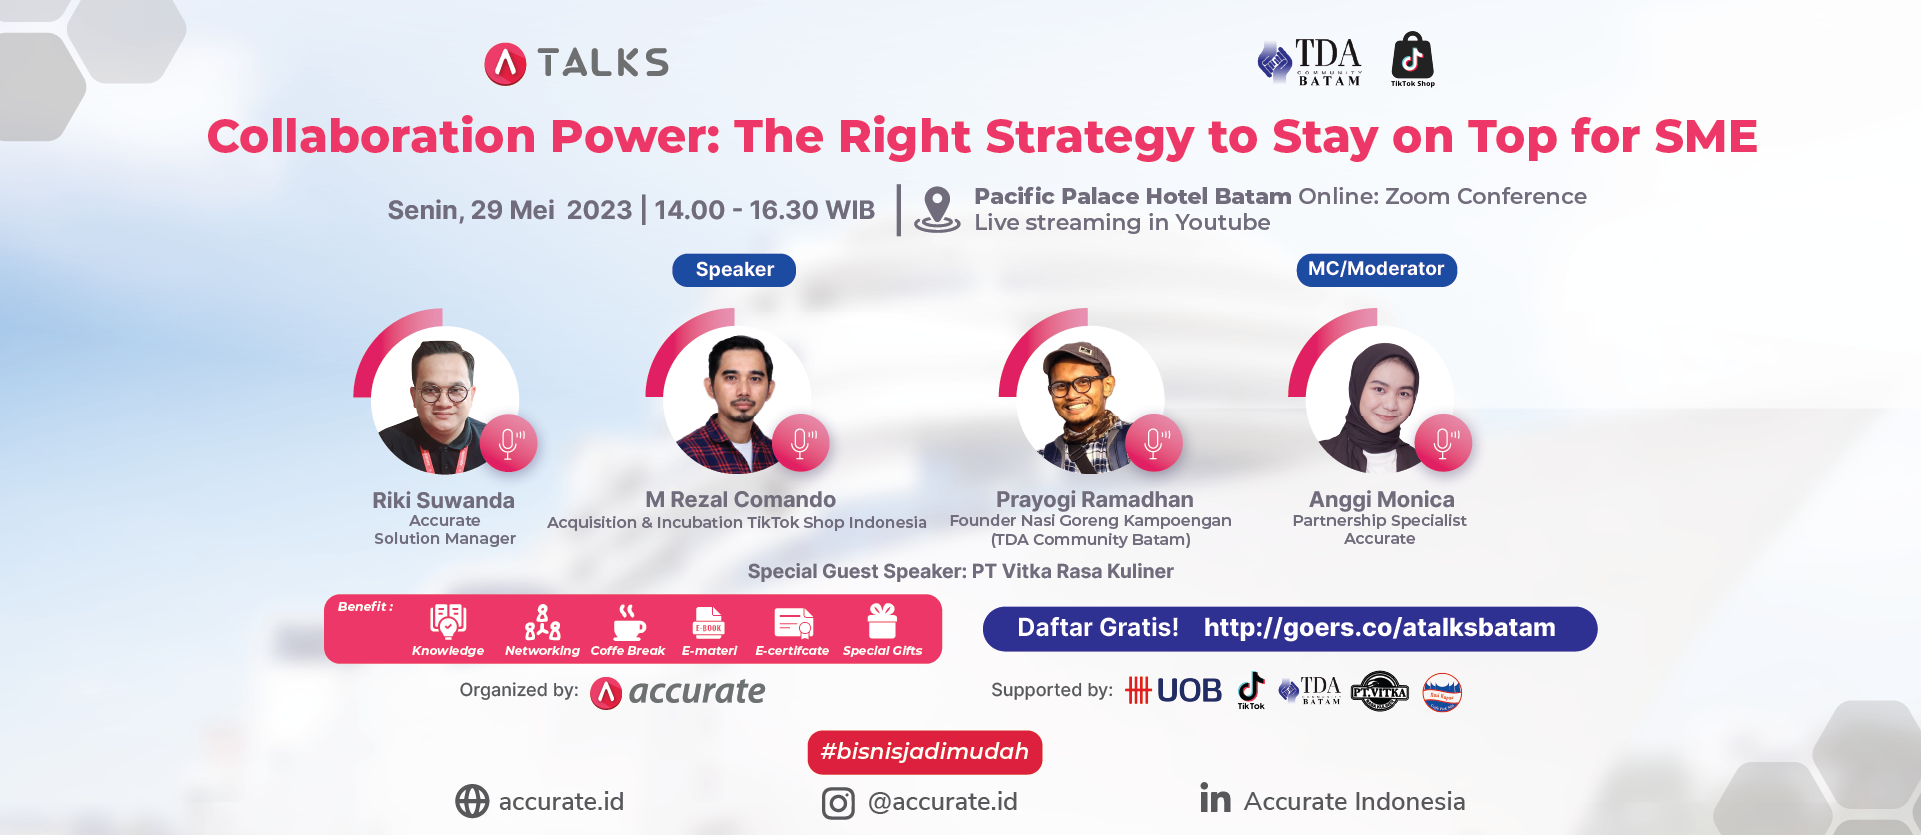 ATALKS Offline Surabaya ”Collaboration Power: The right strategy to stay on top for SME”